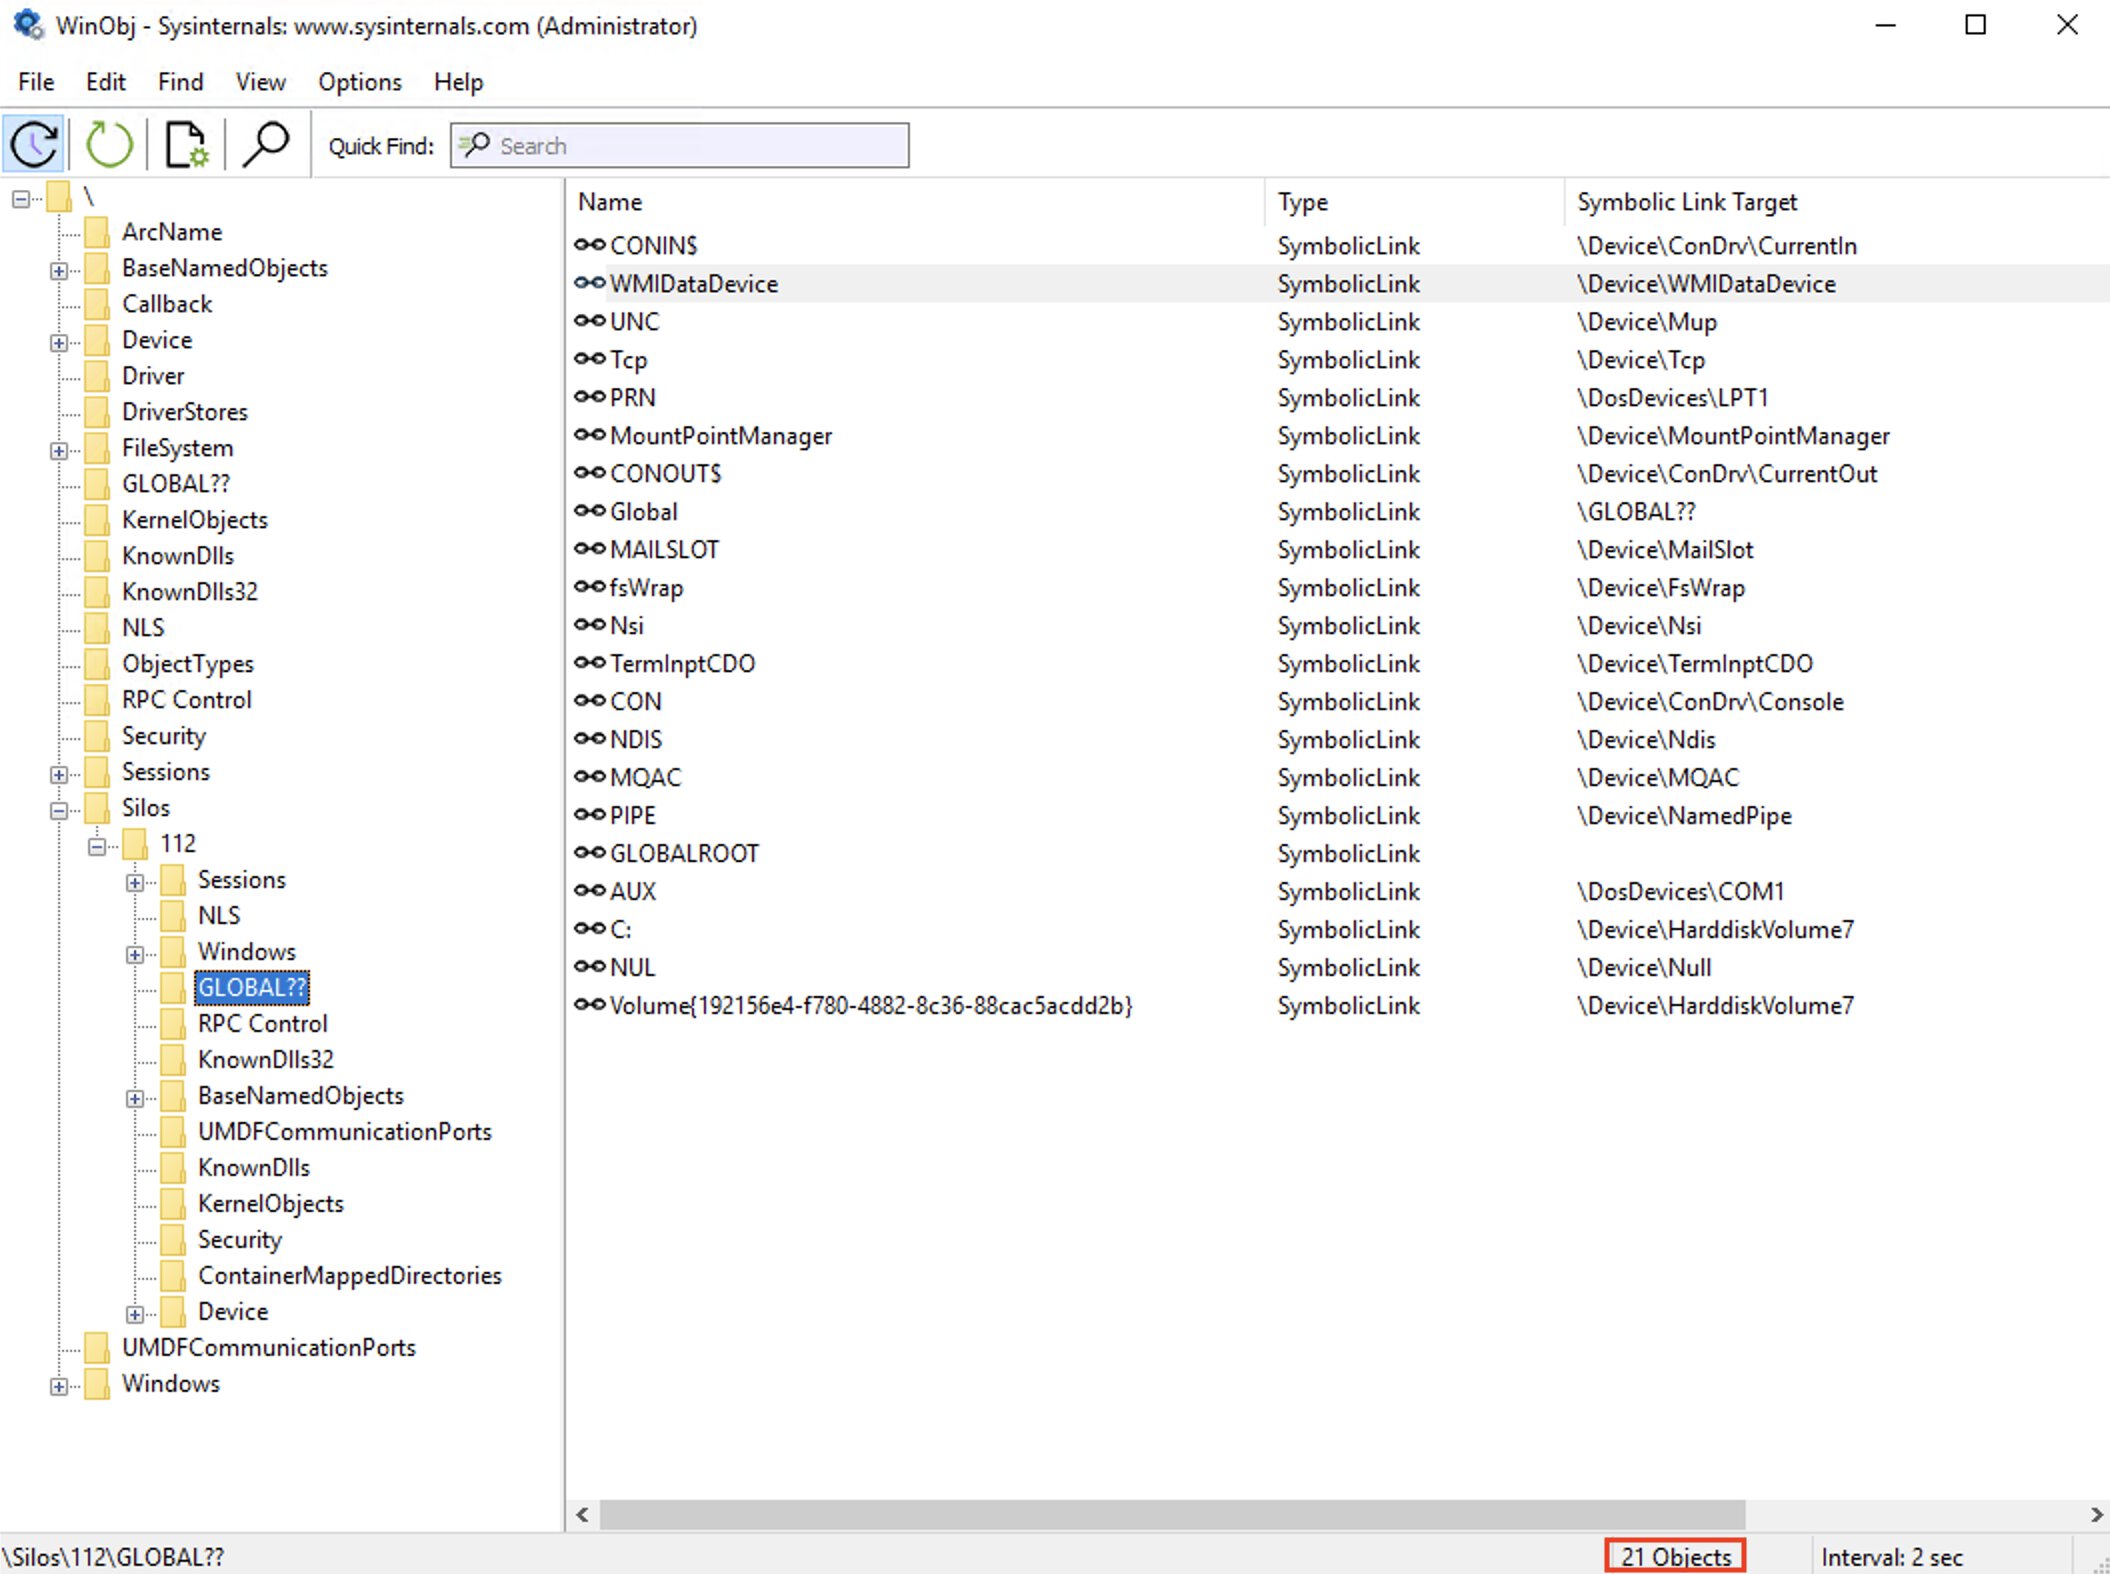 Screenshot of the \Silos\112\GLOBAL??\\ object directory in WinObj, there are 21 objects available to the host.